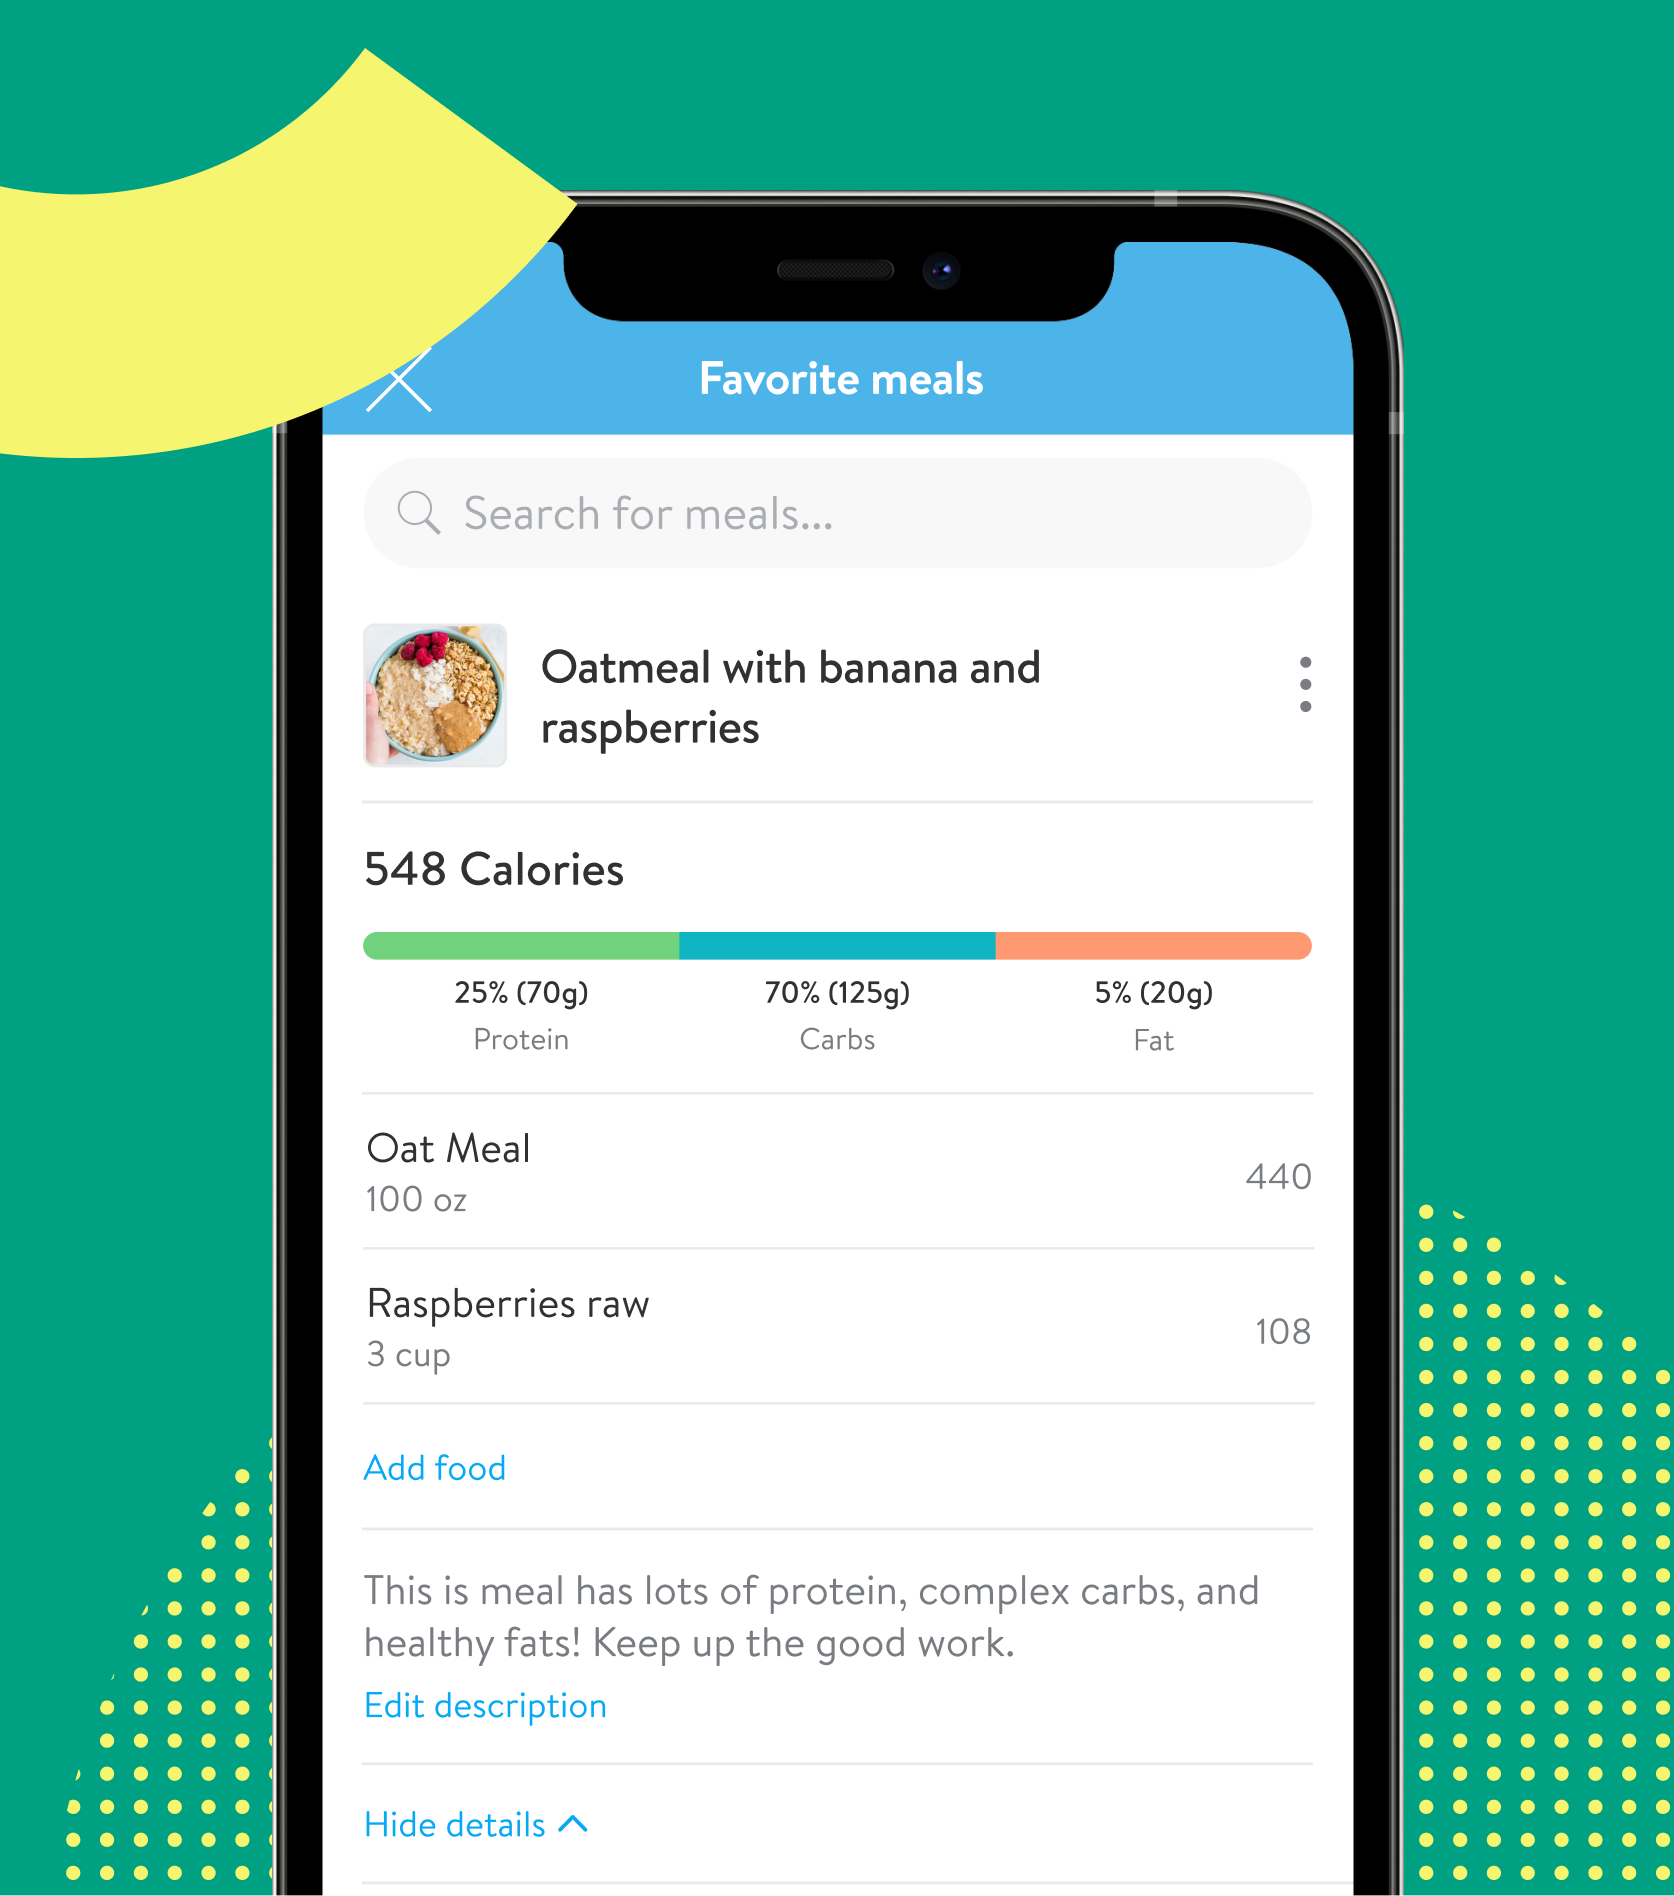 Mobile screen showing feedback from a coach that says: "This meal has lots of protein, complex carbs, and healthy fats! Keep up the good work." from Trainerize's in-app meal tracker.